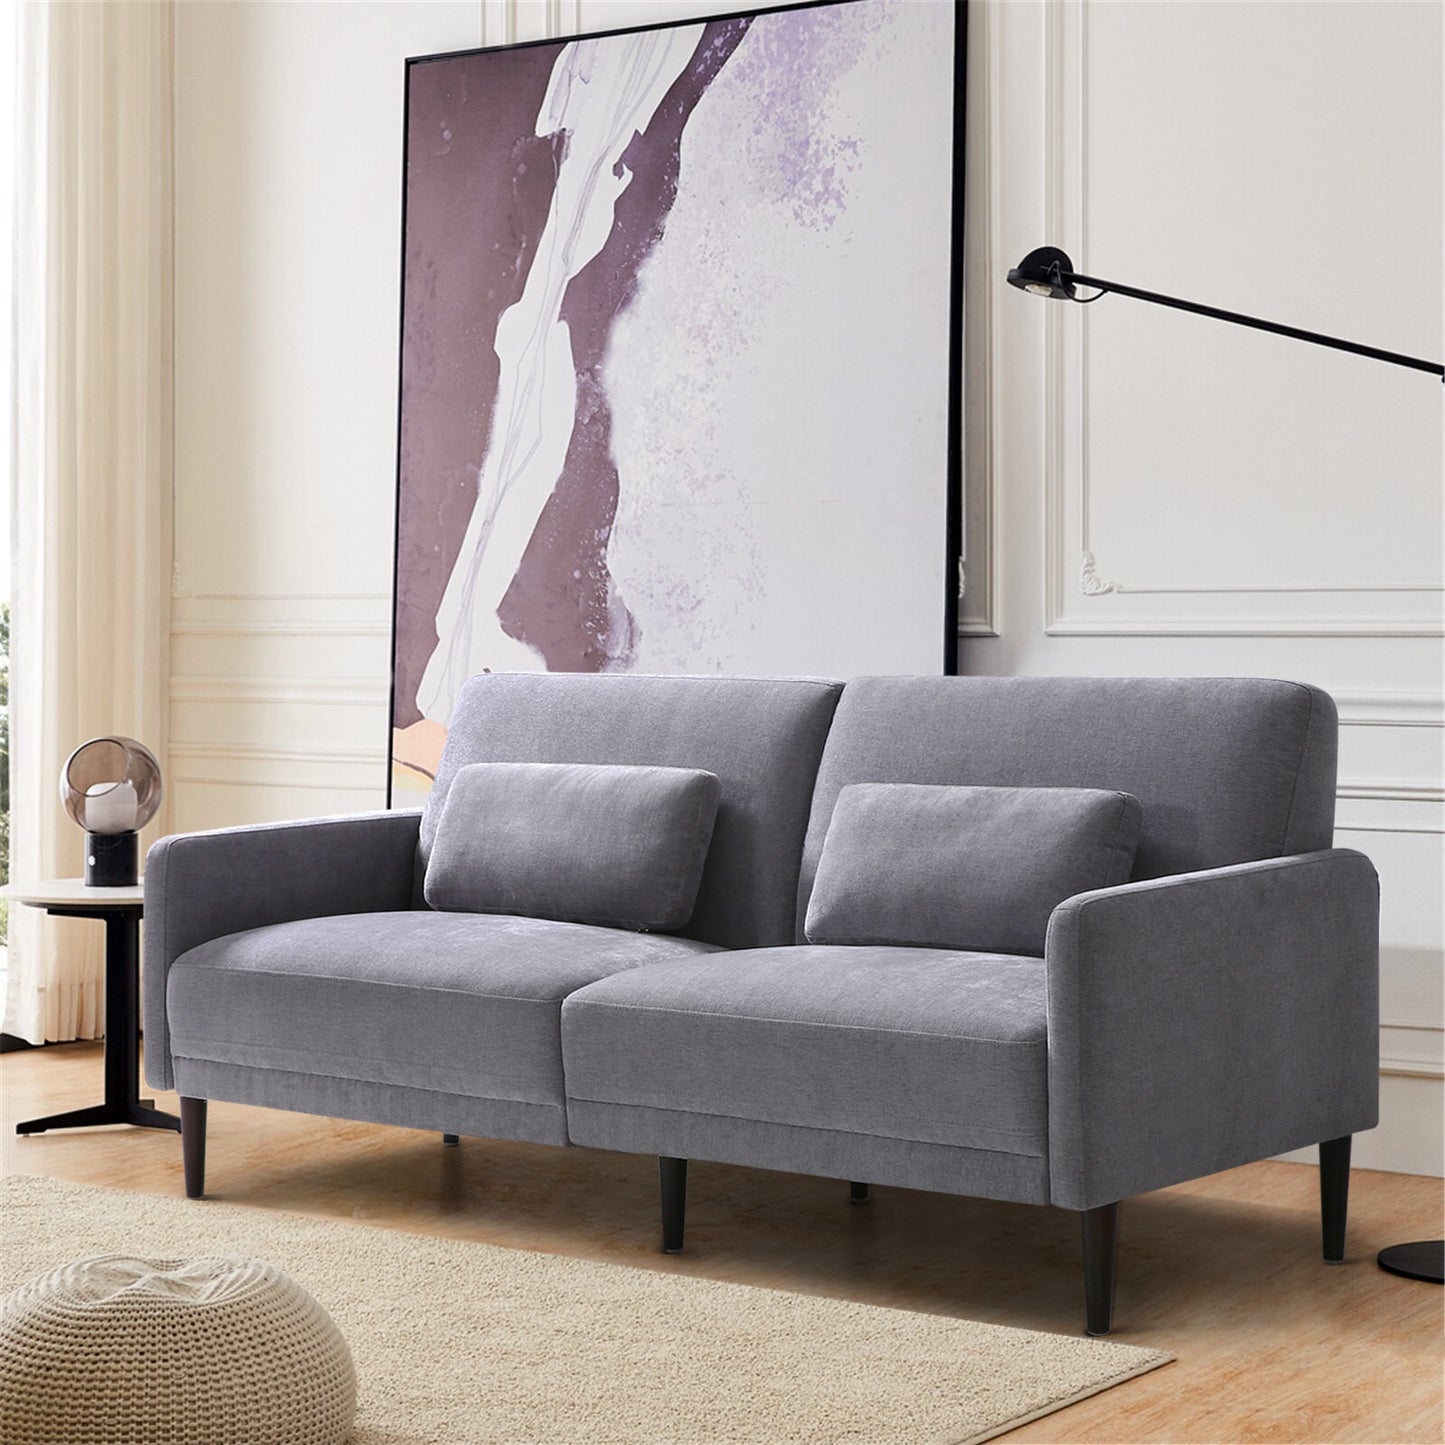 Sofa Loveseat,Soft and Comfortable,Modern Solid Wood Frame,Tool-Free Quick Assembly